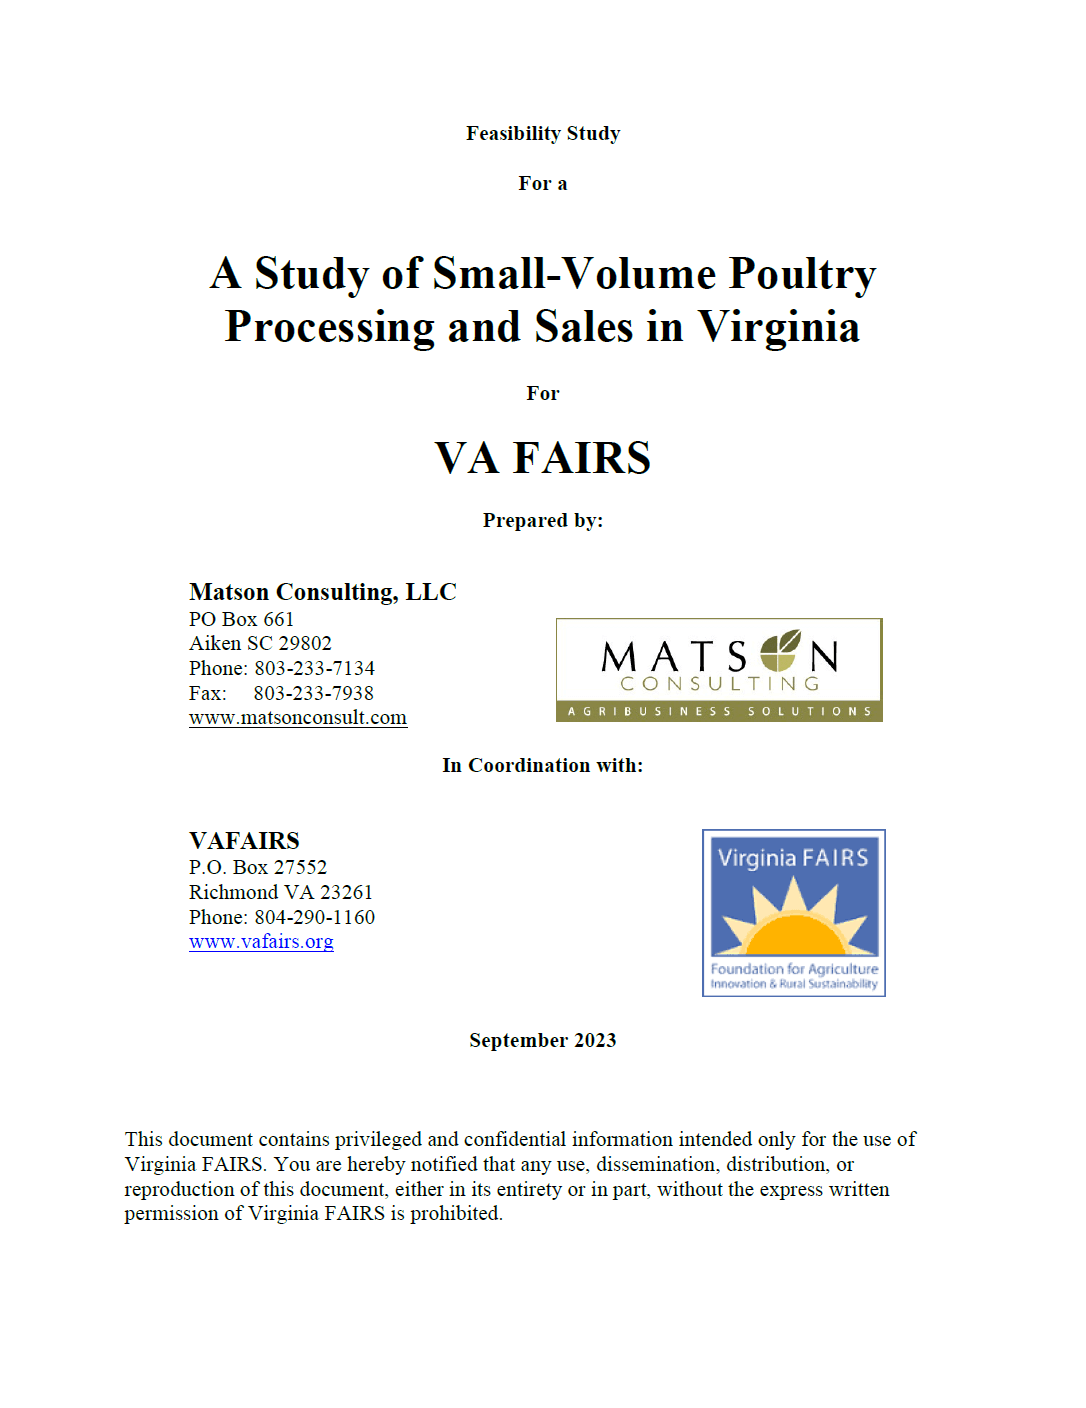 A Study of Small-Volume Poultry Processing in Virginia